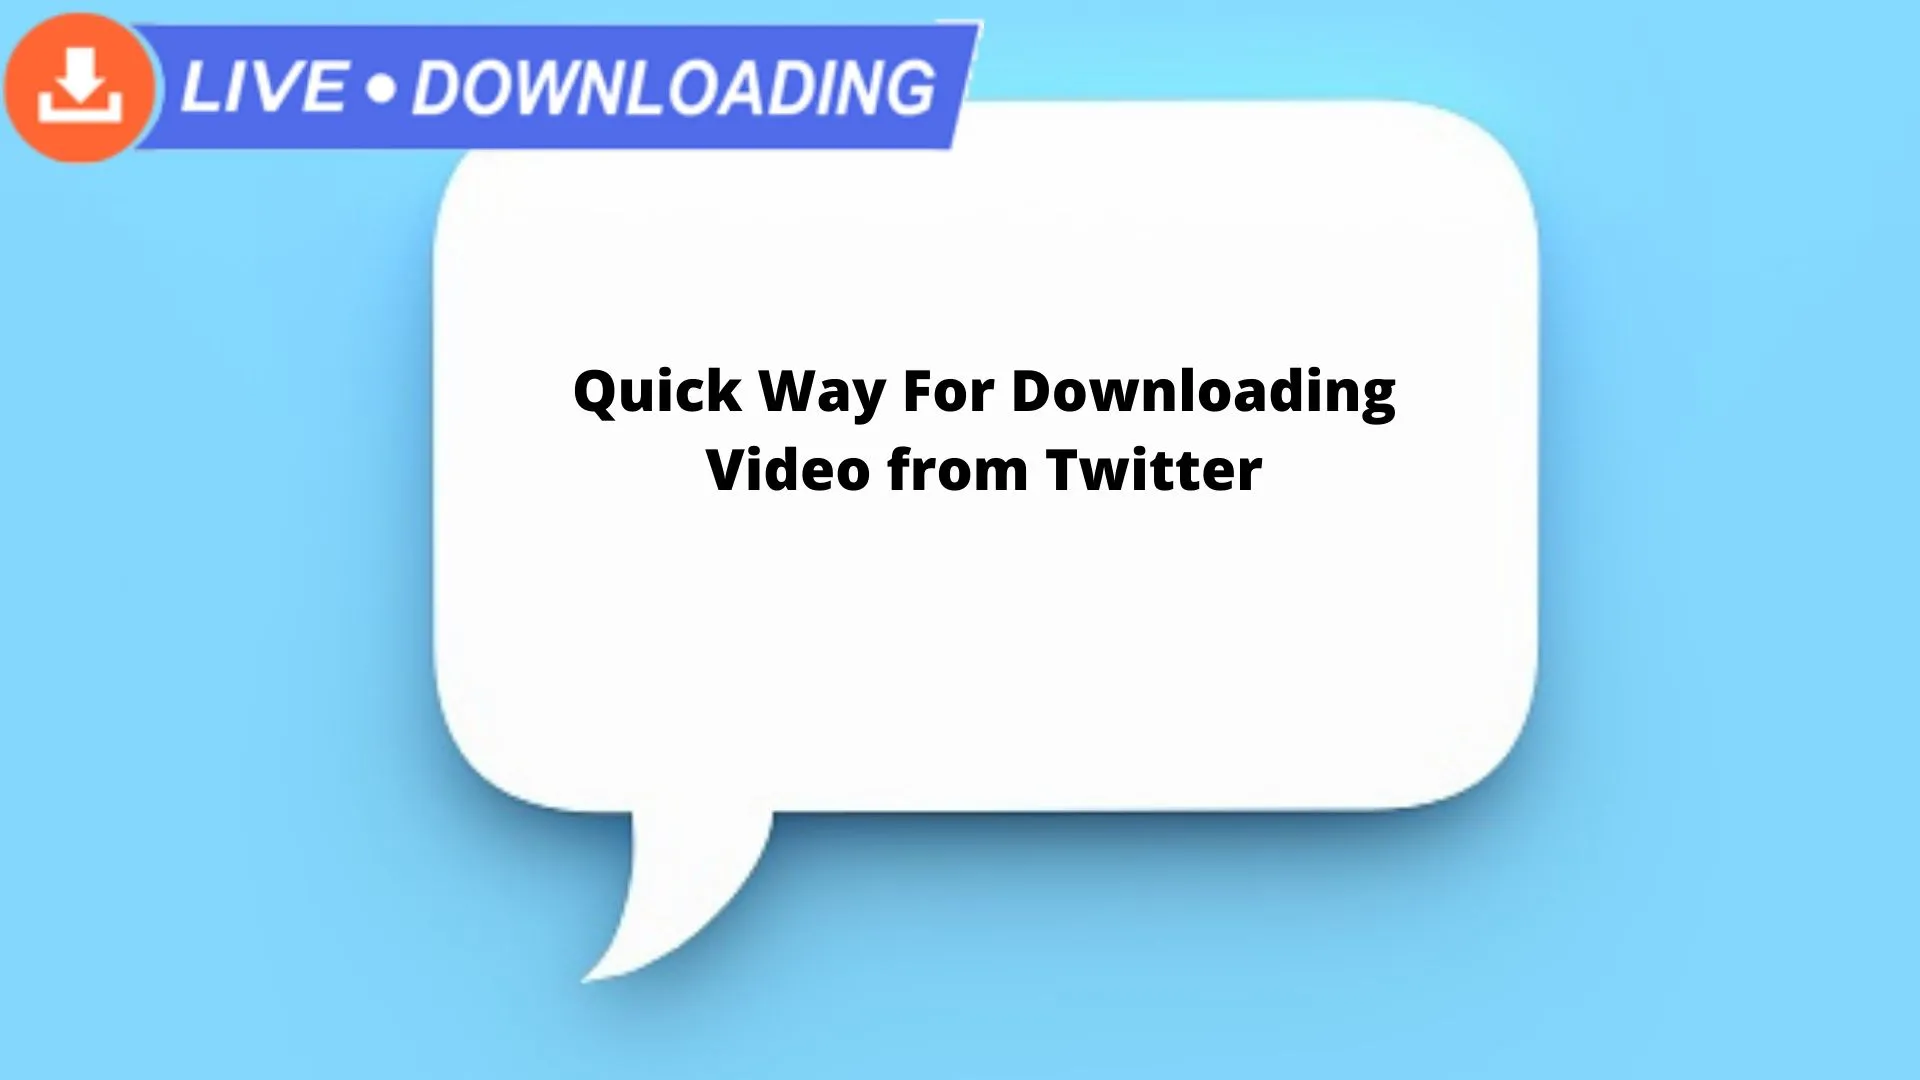 Quick Way To Downloading Video from Twitter | LiveDownloading